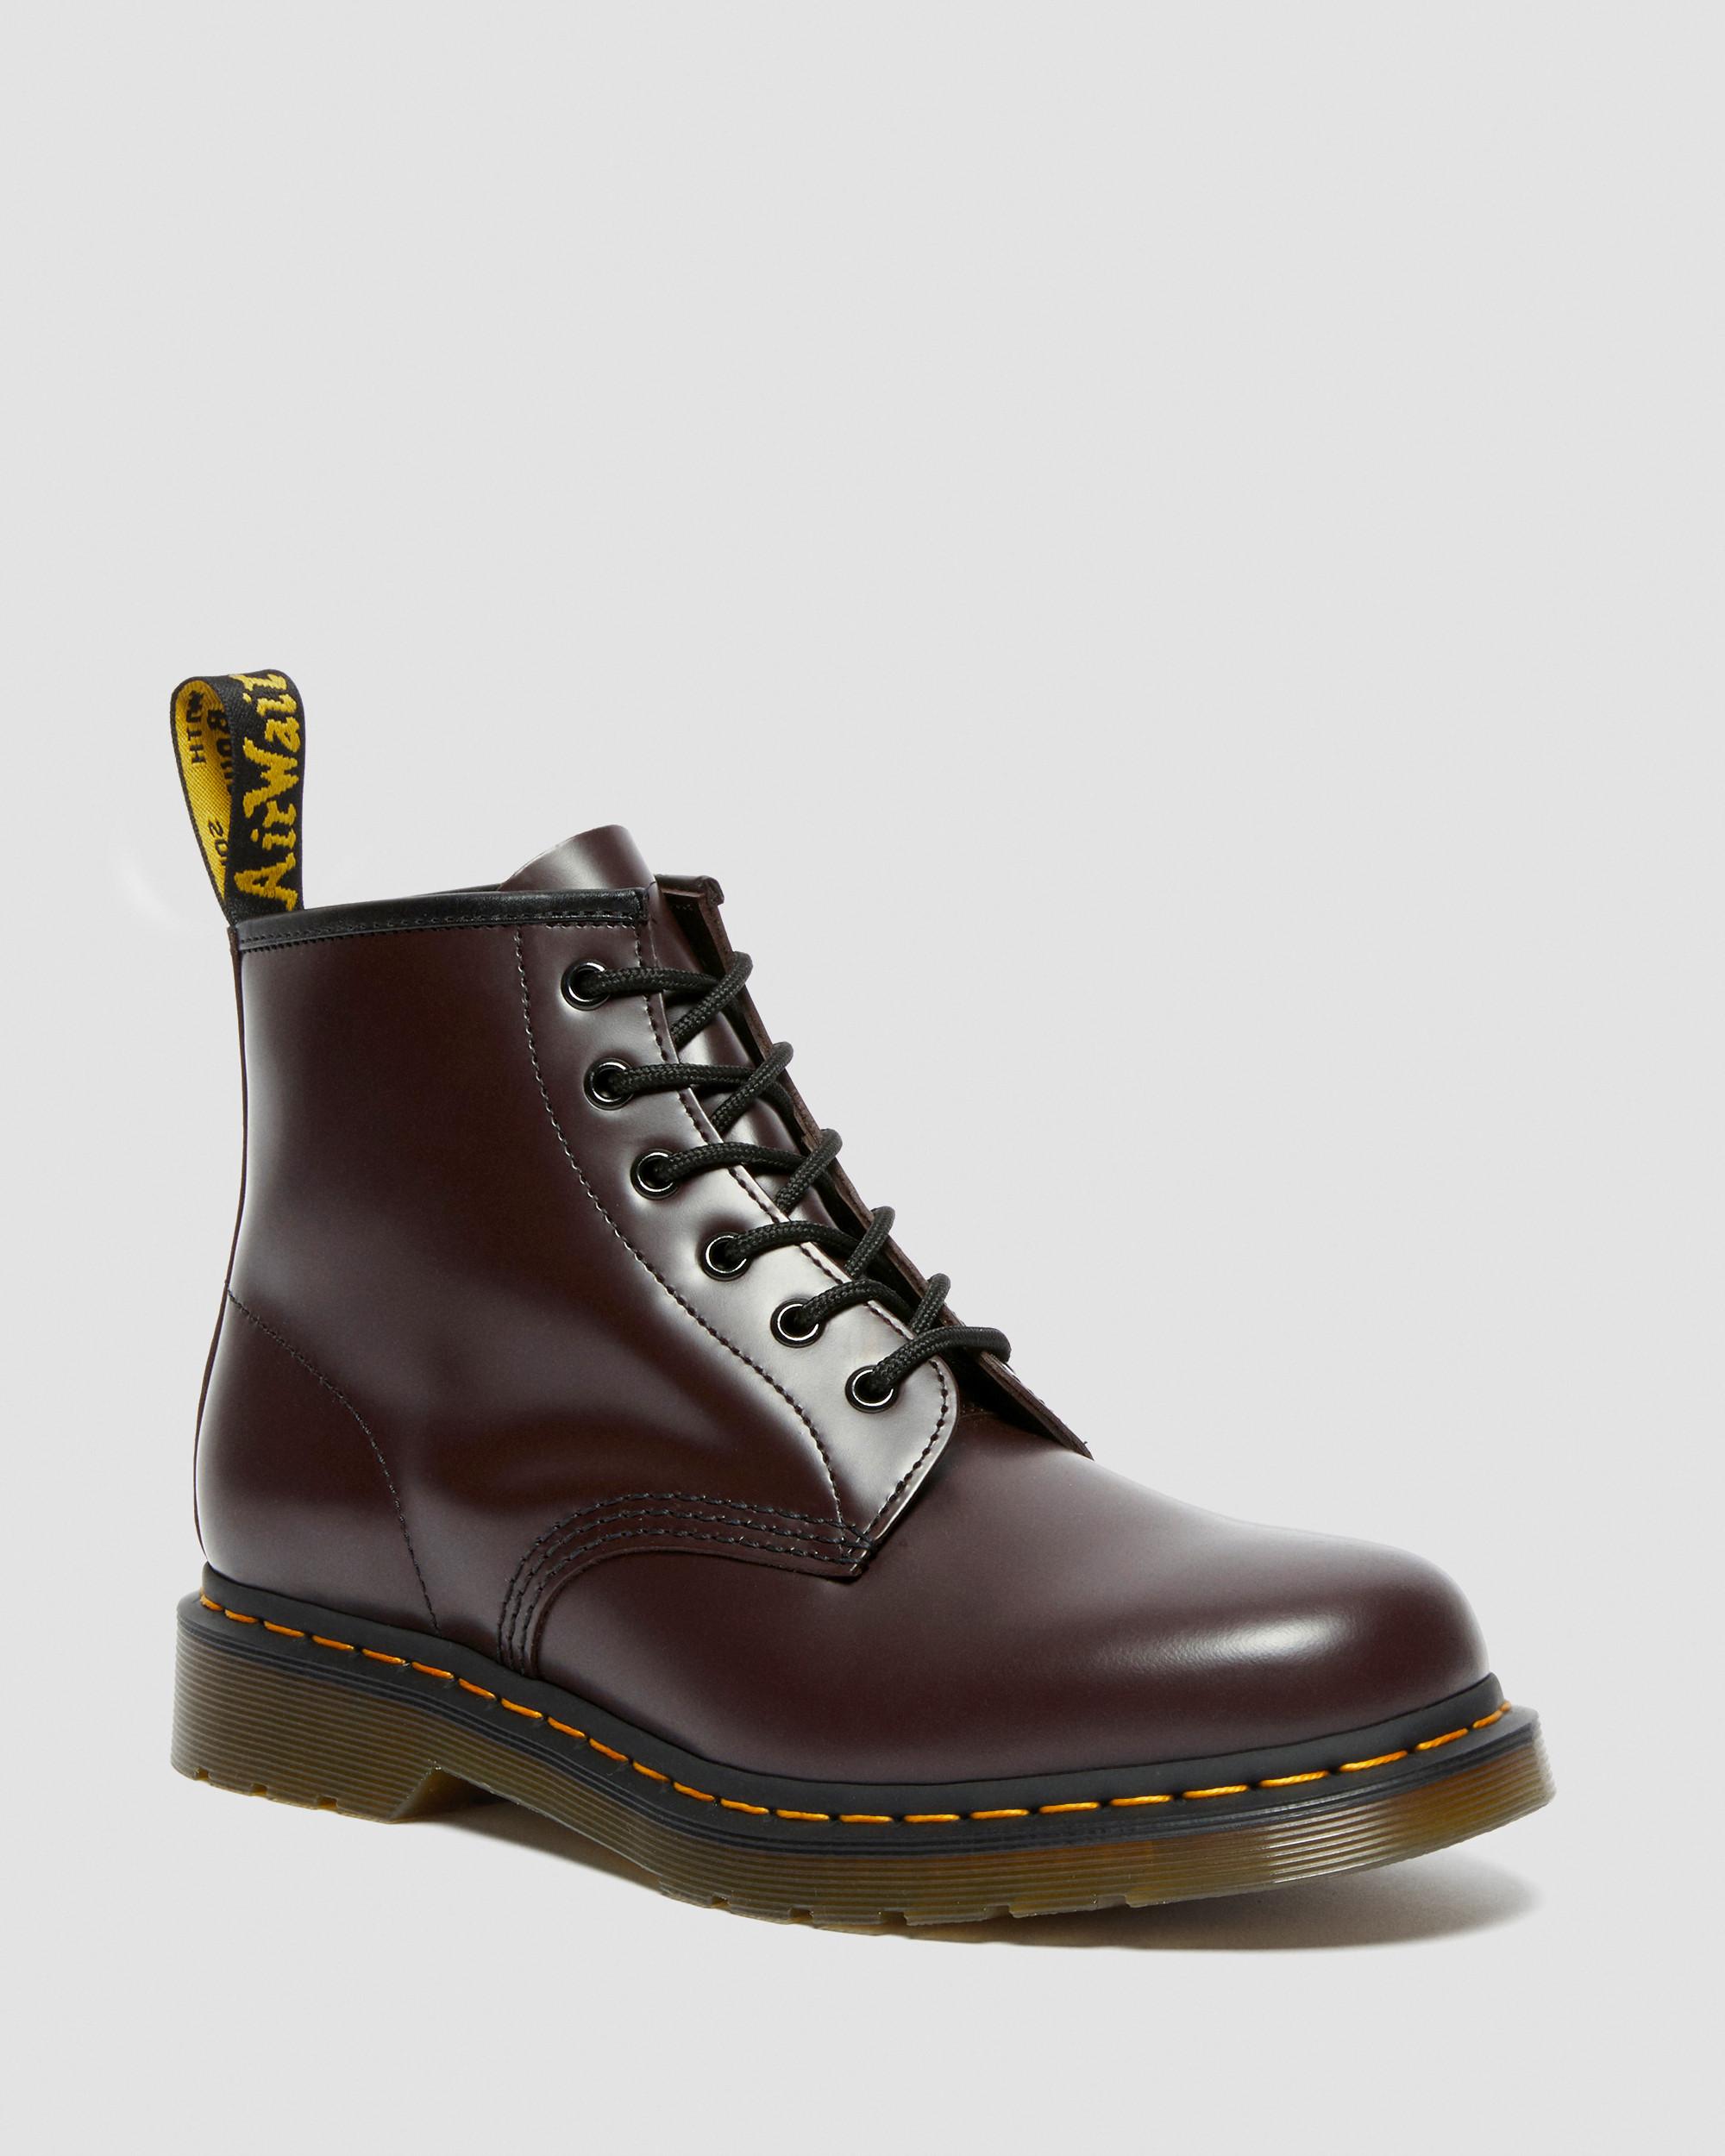 101 Yellow Stitch Smooth Leather Ankle Boots in Burgundy